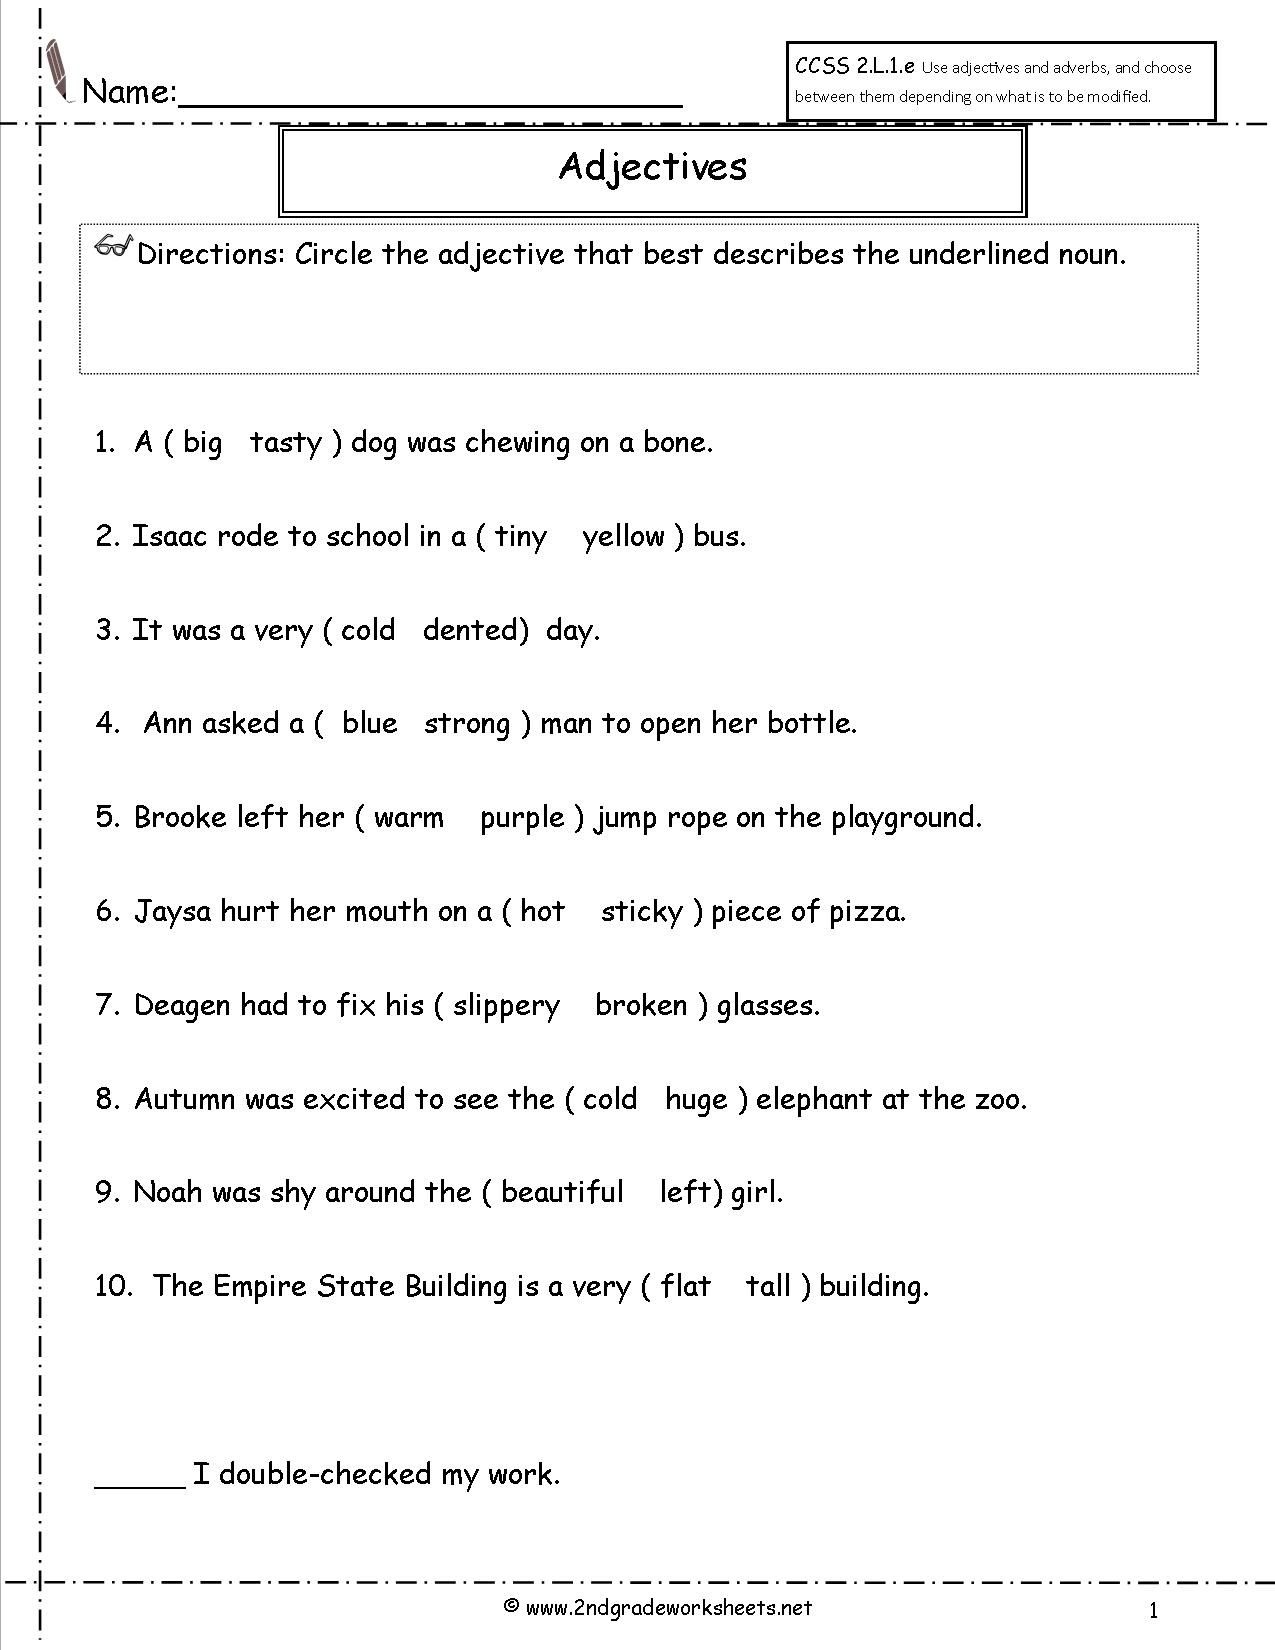 free-printable-grammar-worksheets-for-2nd-grade-free-printable-a-to-z